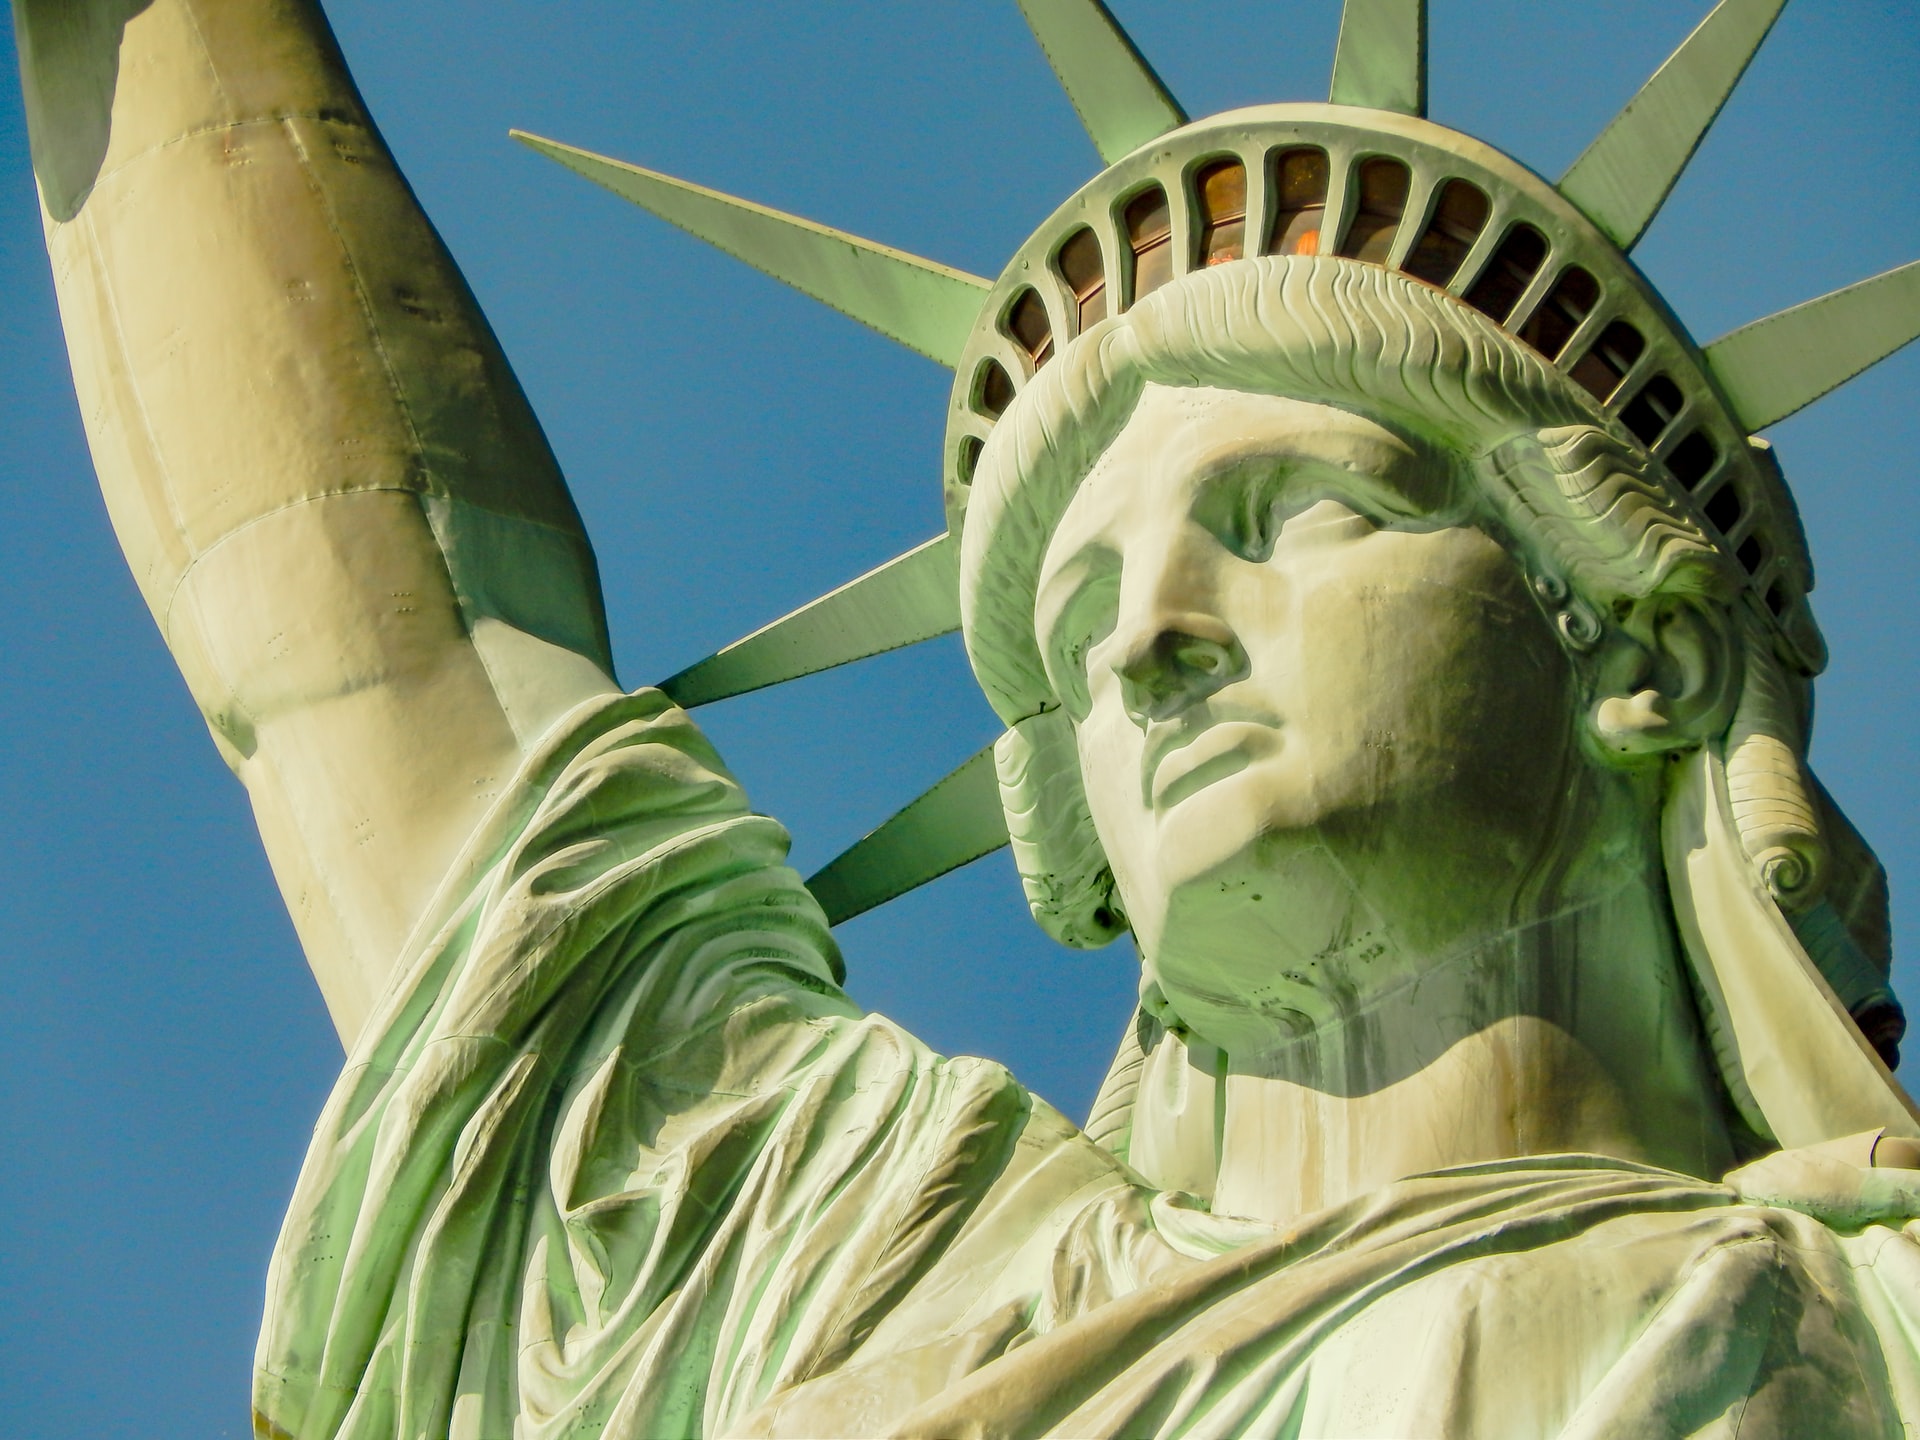 Wrong Statue of Liberty printed on U.S. stamp (it's the Las Vegas one)